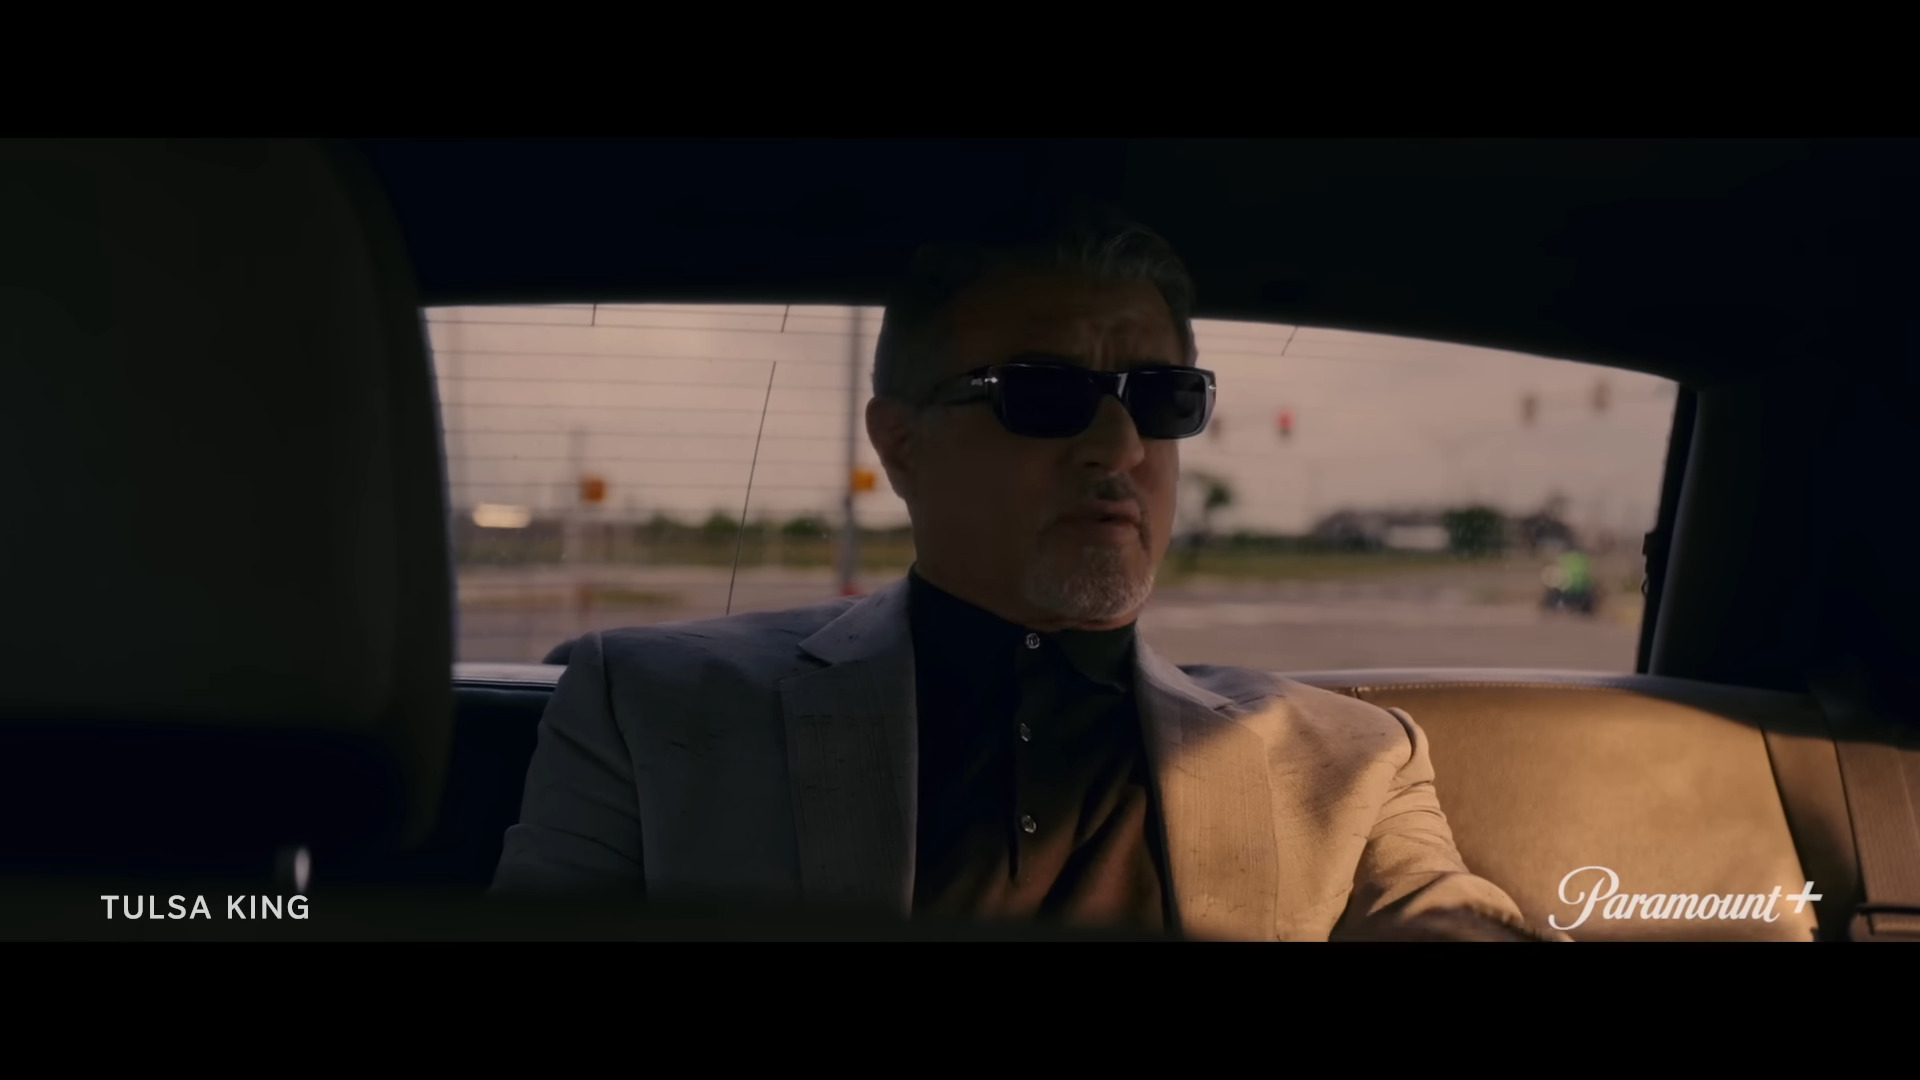 Dwight "The General" Manfredi (Sylvester Stallone) looks to start a new mafia empire via Tulsa King | Official Trailer, Paramount+ YouTube